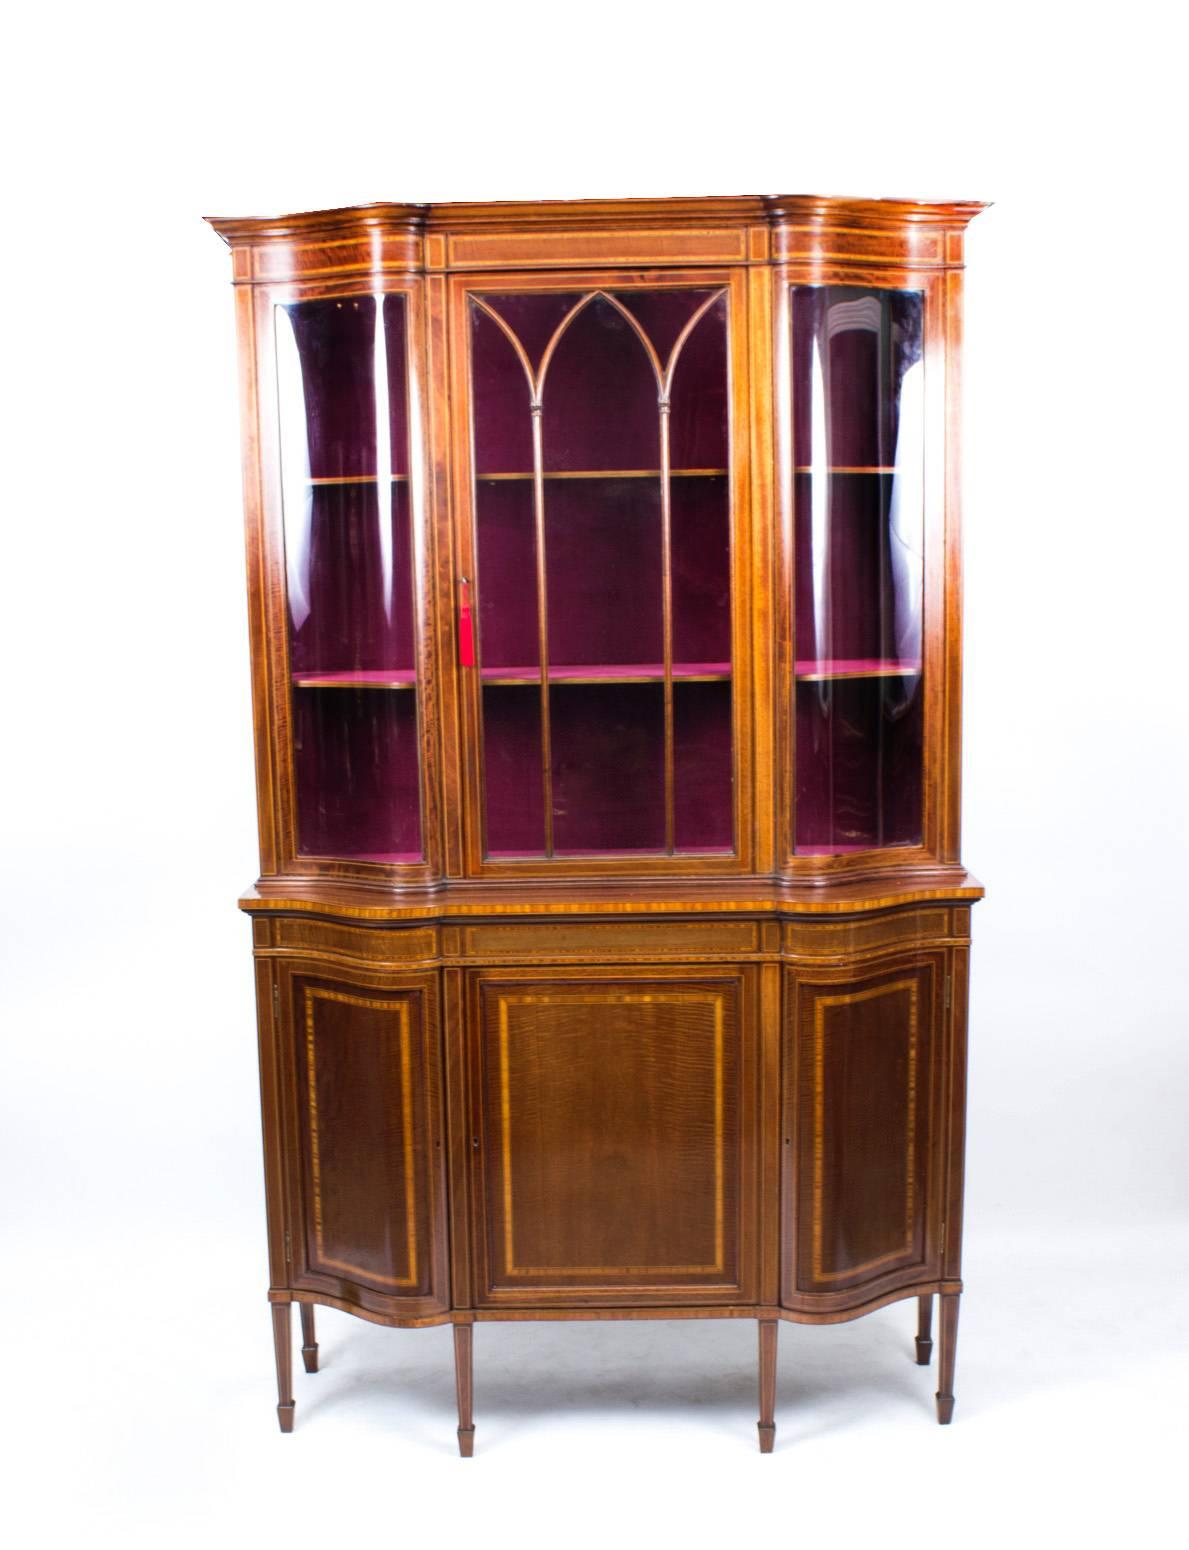 Antique Edwardian Serpentine Inlaid Display Cabinet Early 20th Century 2